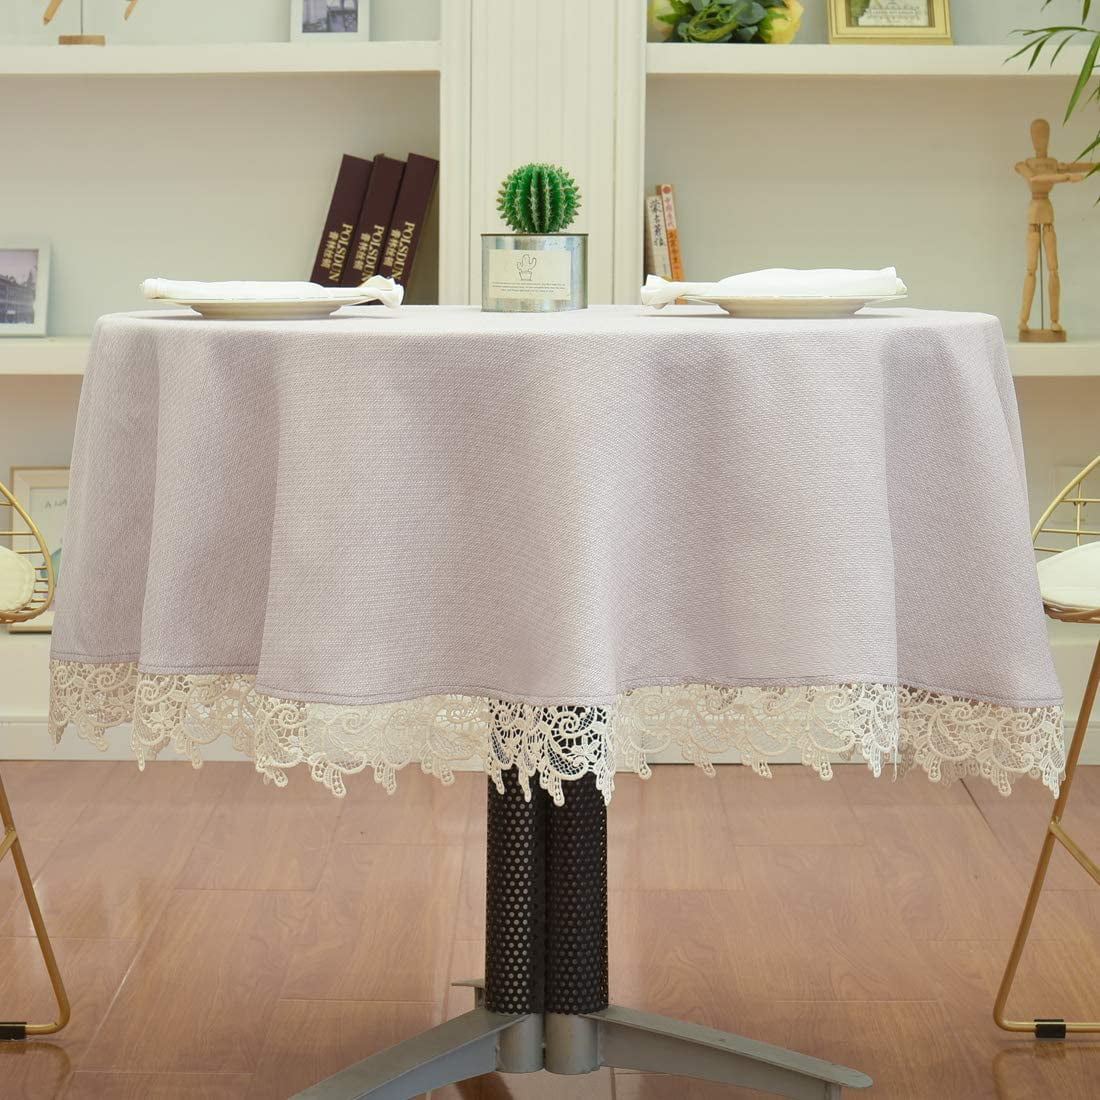 Small Round Tablecloth Lace Dust Proof, What Size Tablecloth For 56 Inch Round Table